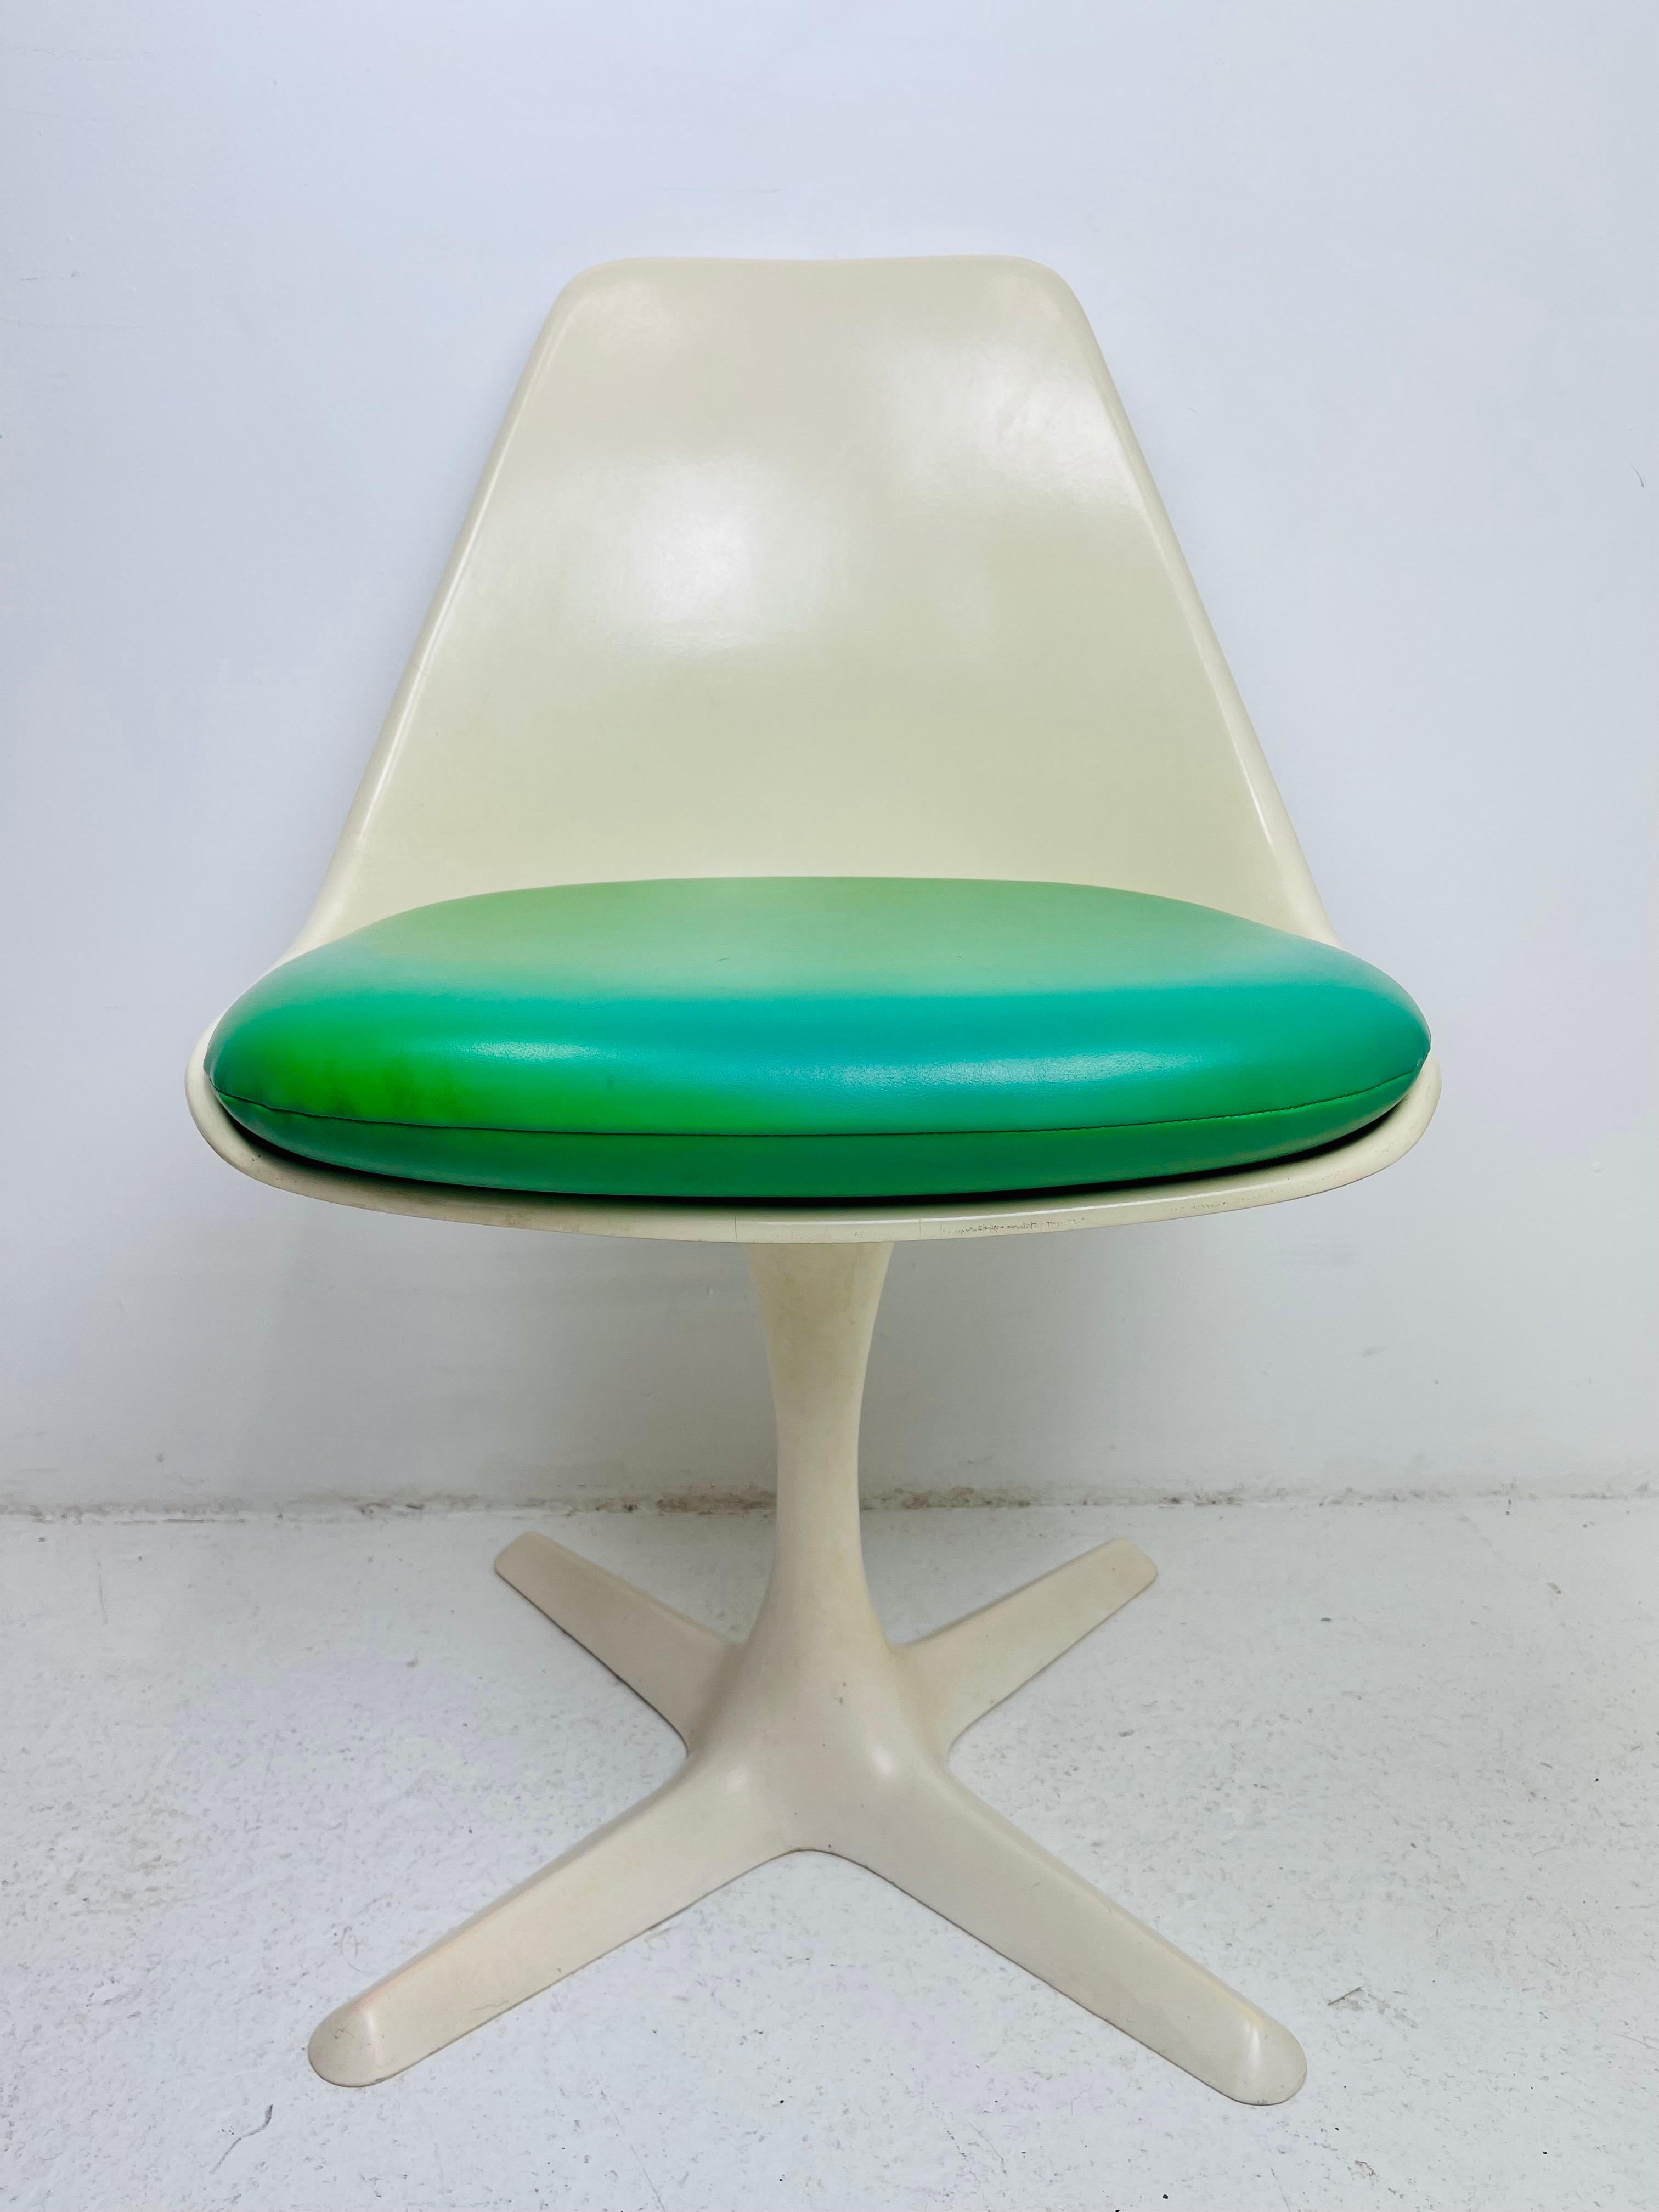 Set of 4 1970s propeller base tulip chairs by Burke. Original seats in good condition with some fading/discoloration; reupholstery is recommended. Labeled on underside.